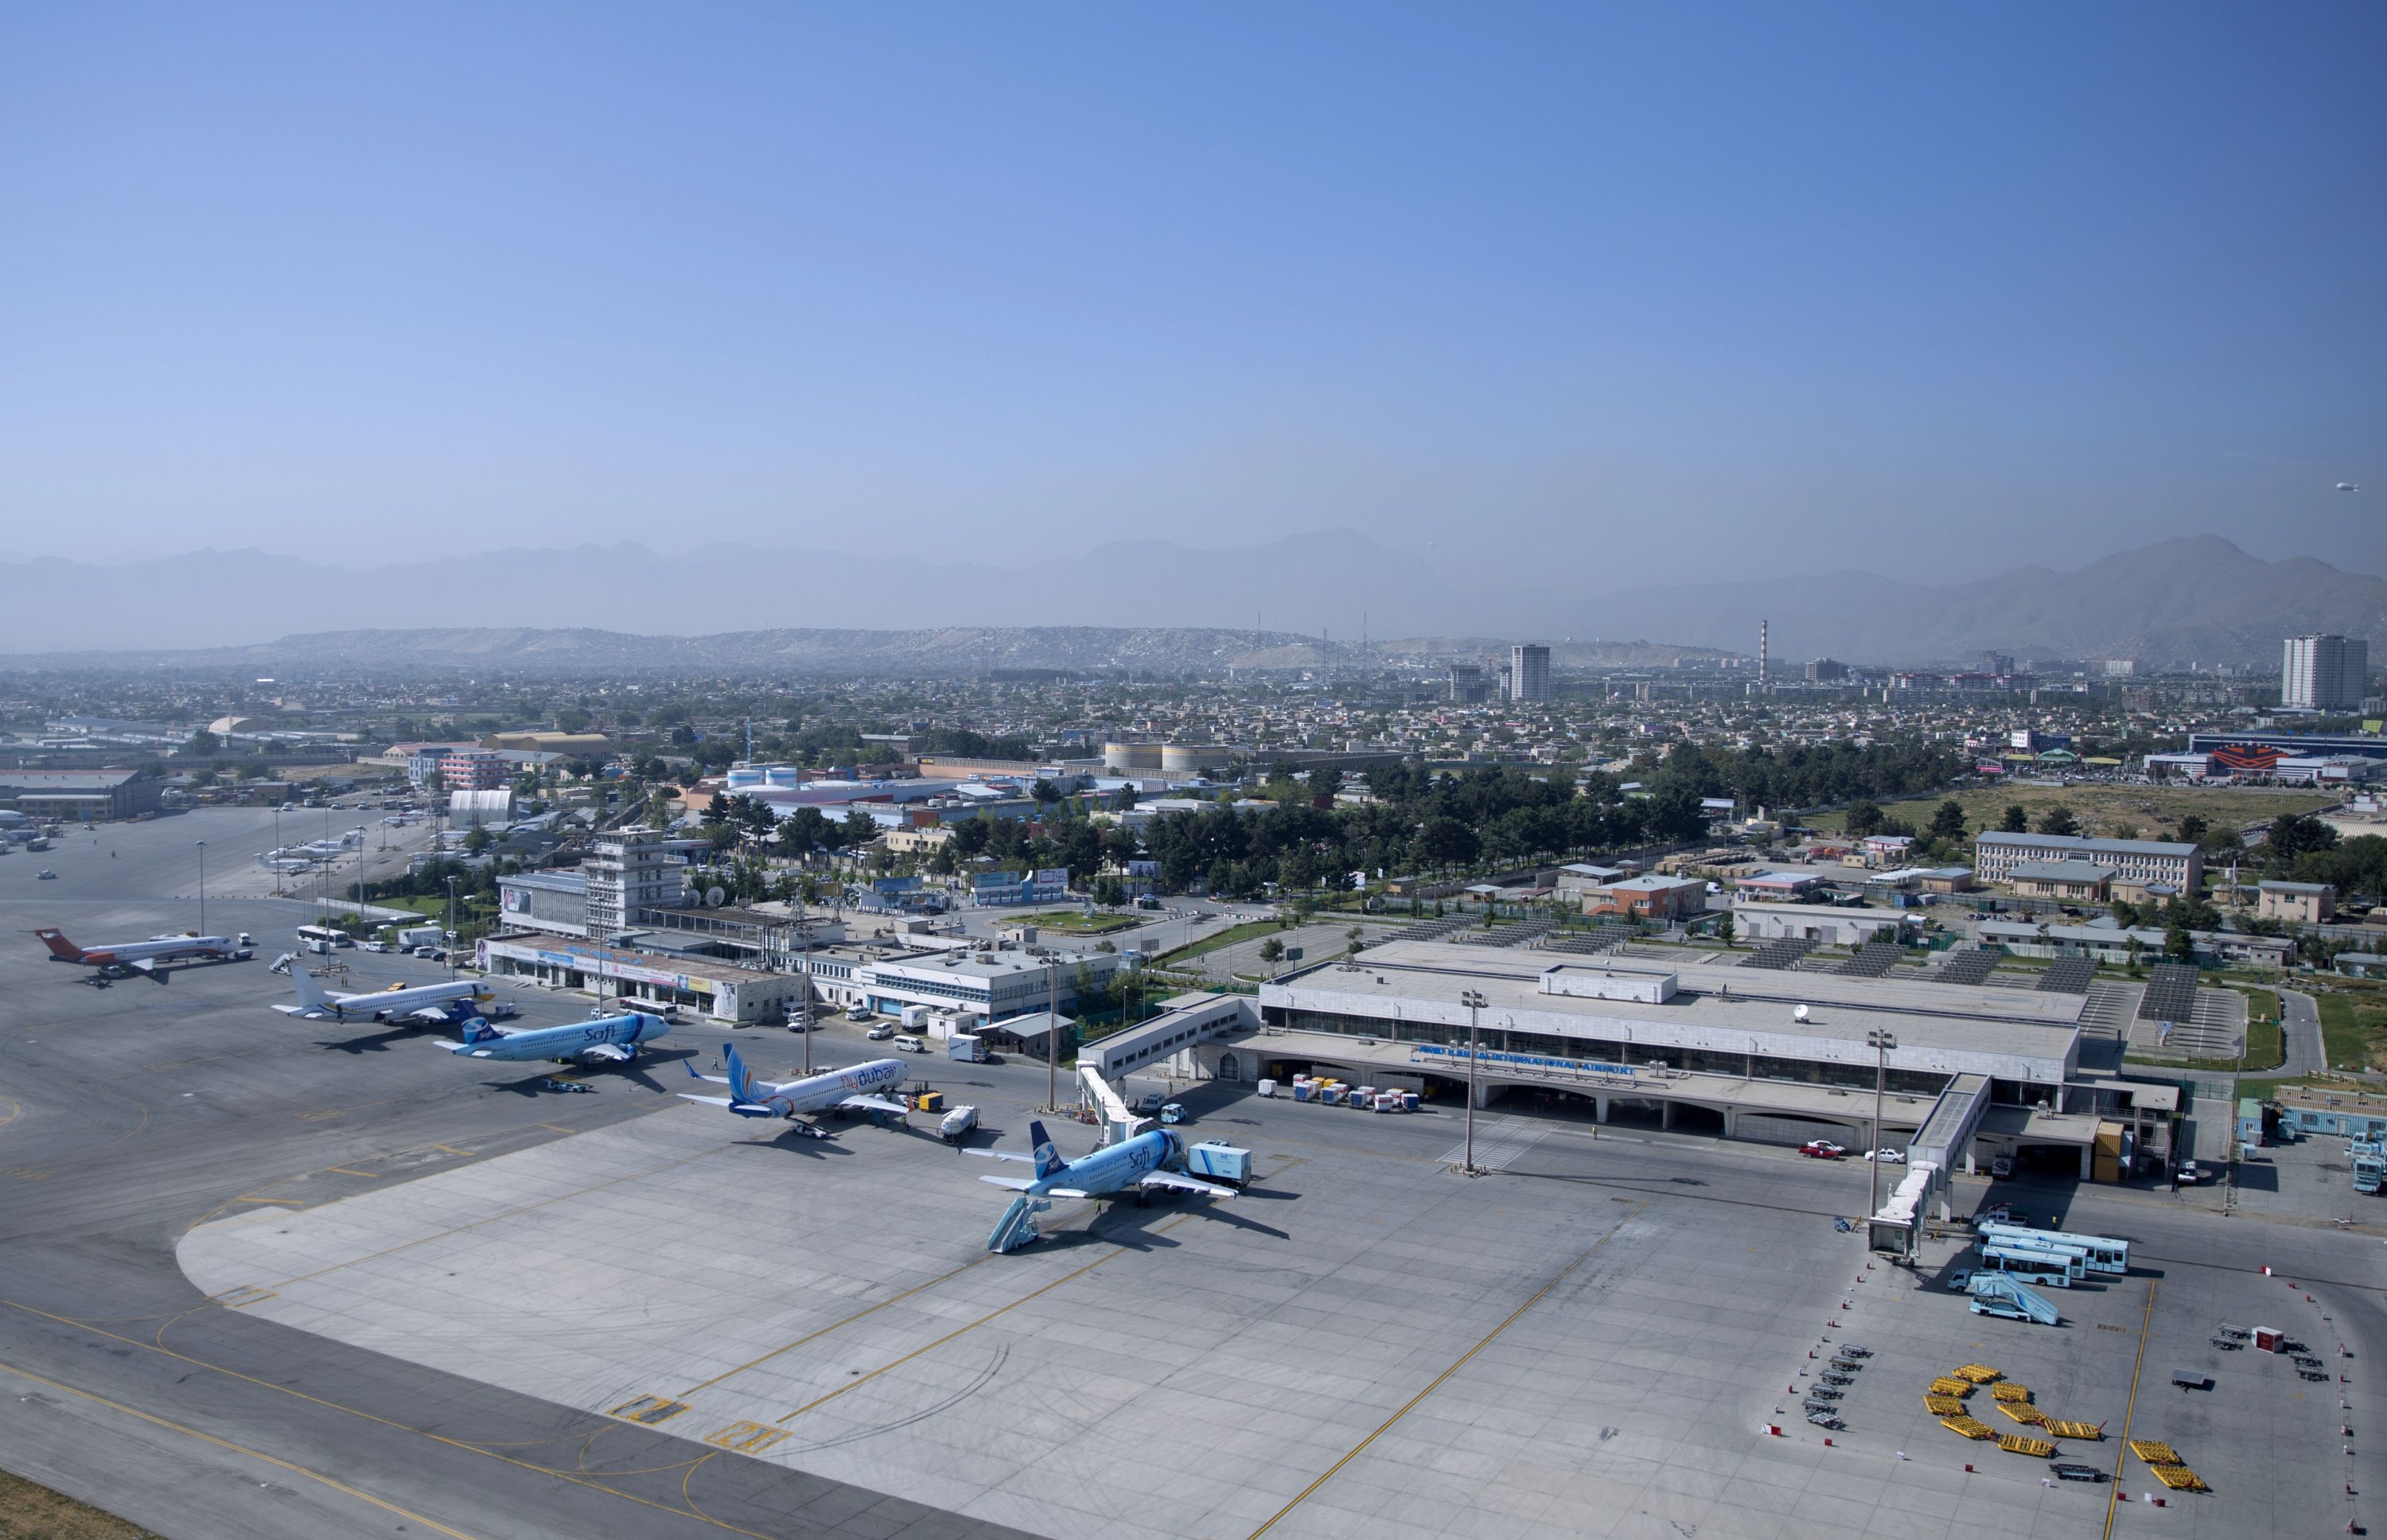 Us Delegation To Visit Turkey Thursday For Kabul Airport Talks Daily Sabah [ 1936 x 3000 Pixel ]